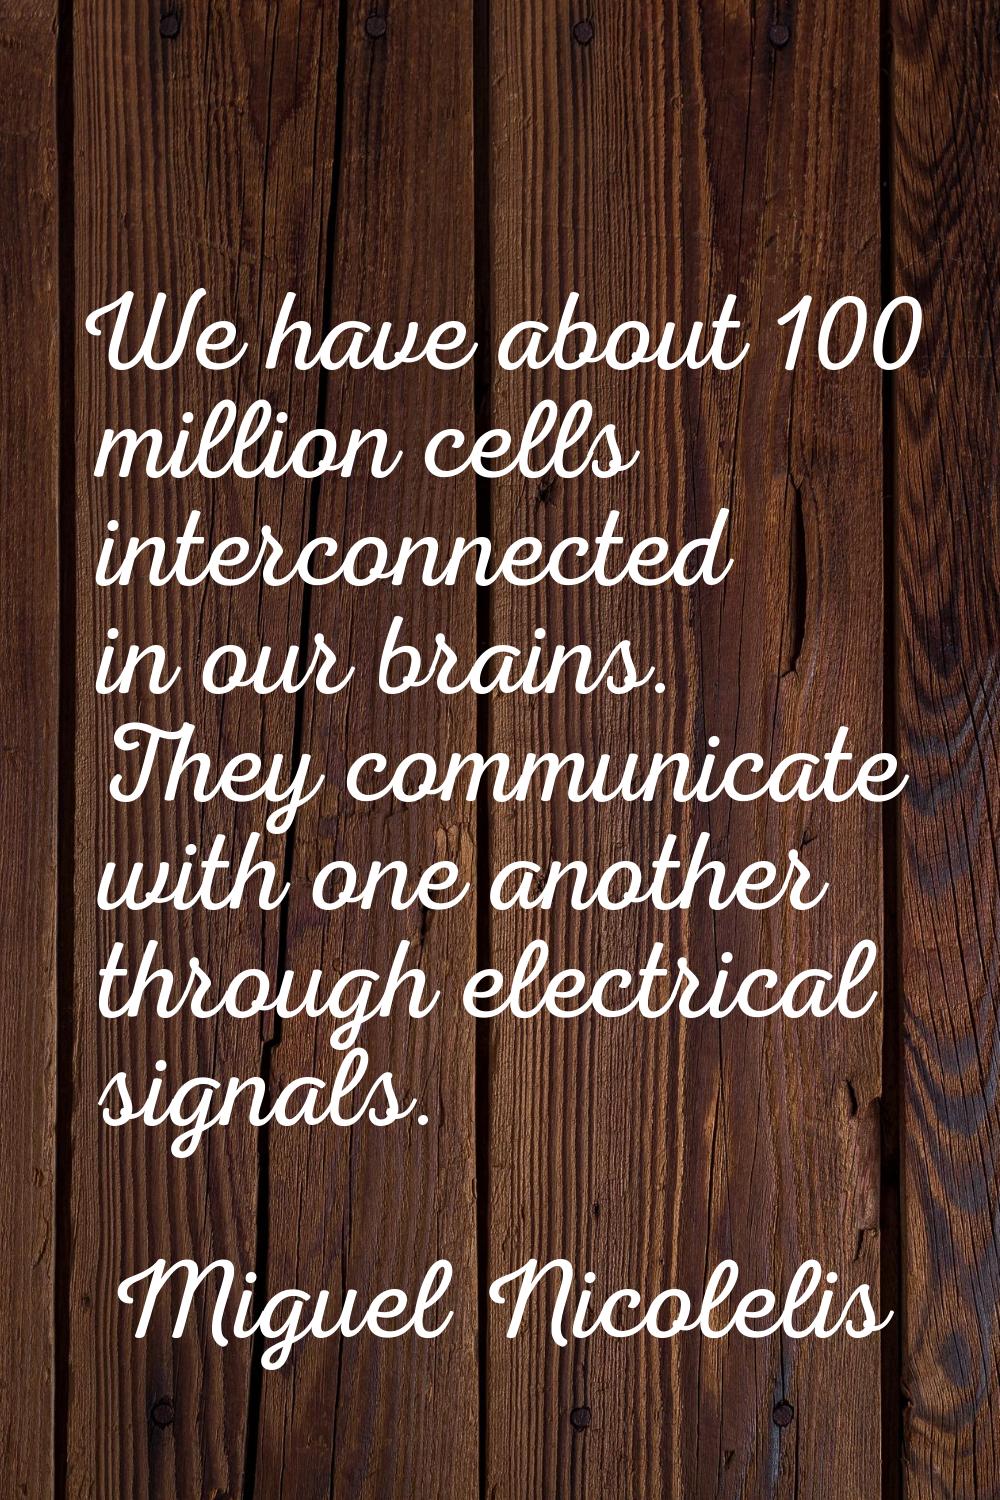 We have about 100 million cells interconnected in our brains. They communicate with one another thr